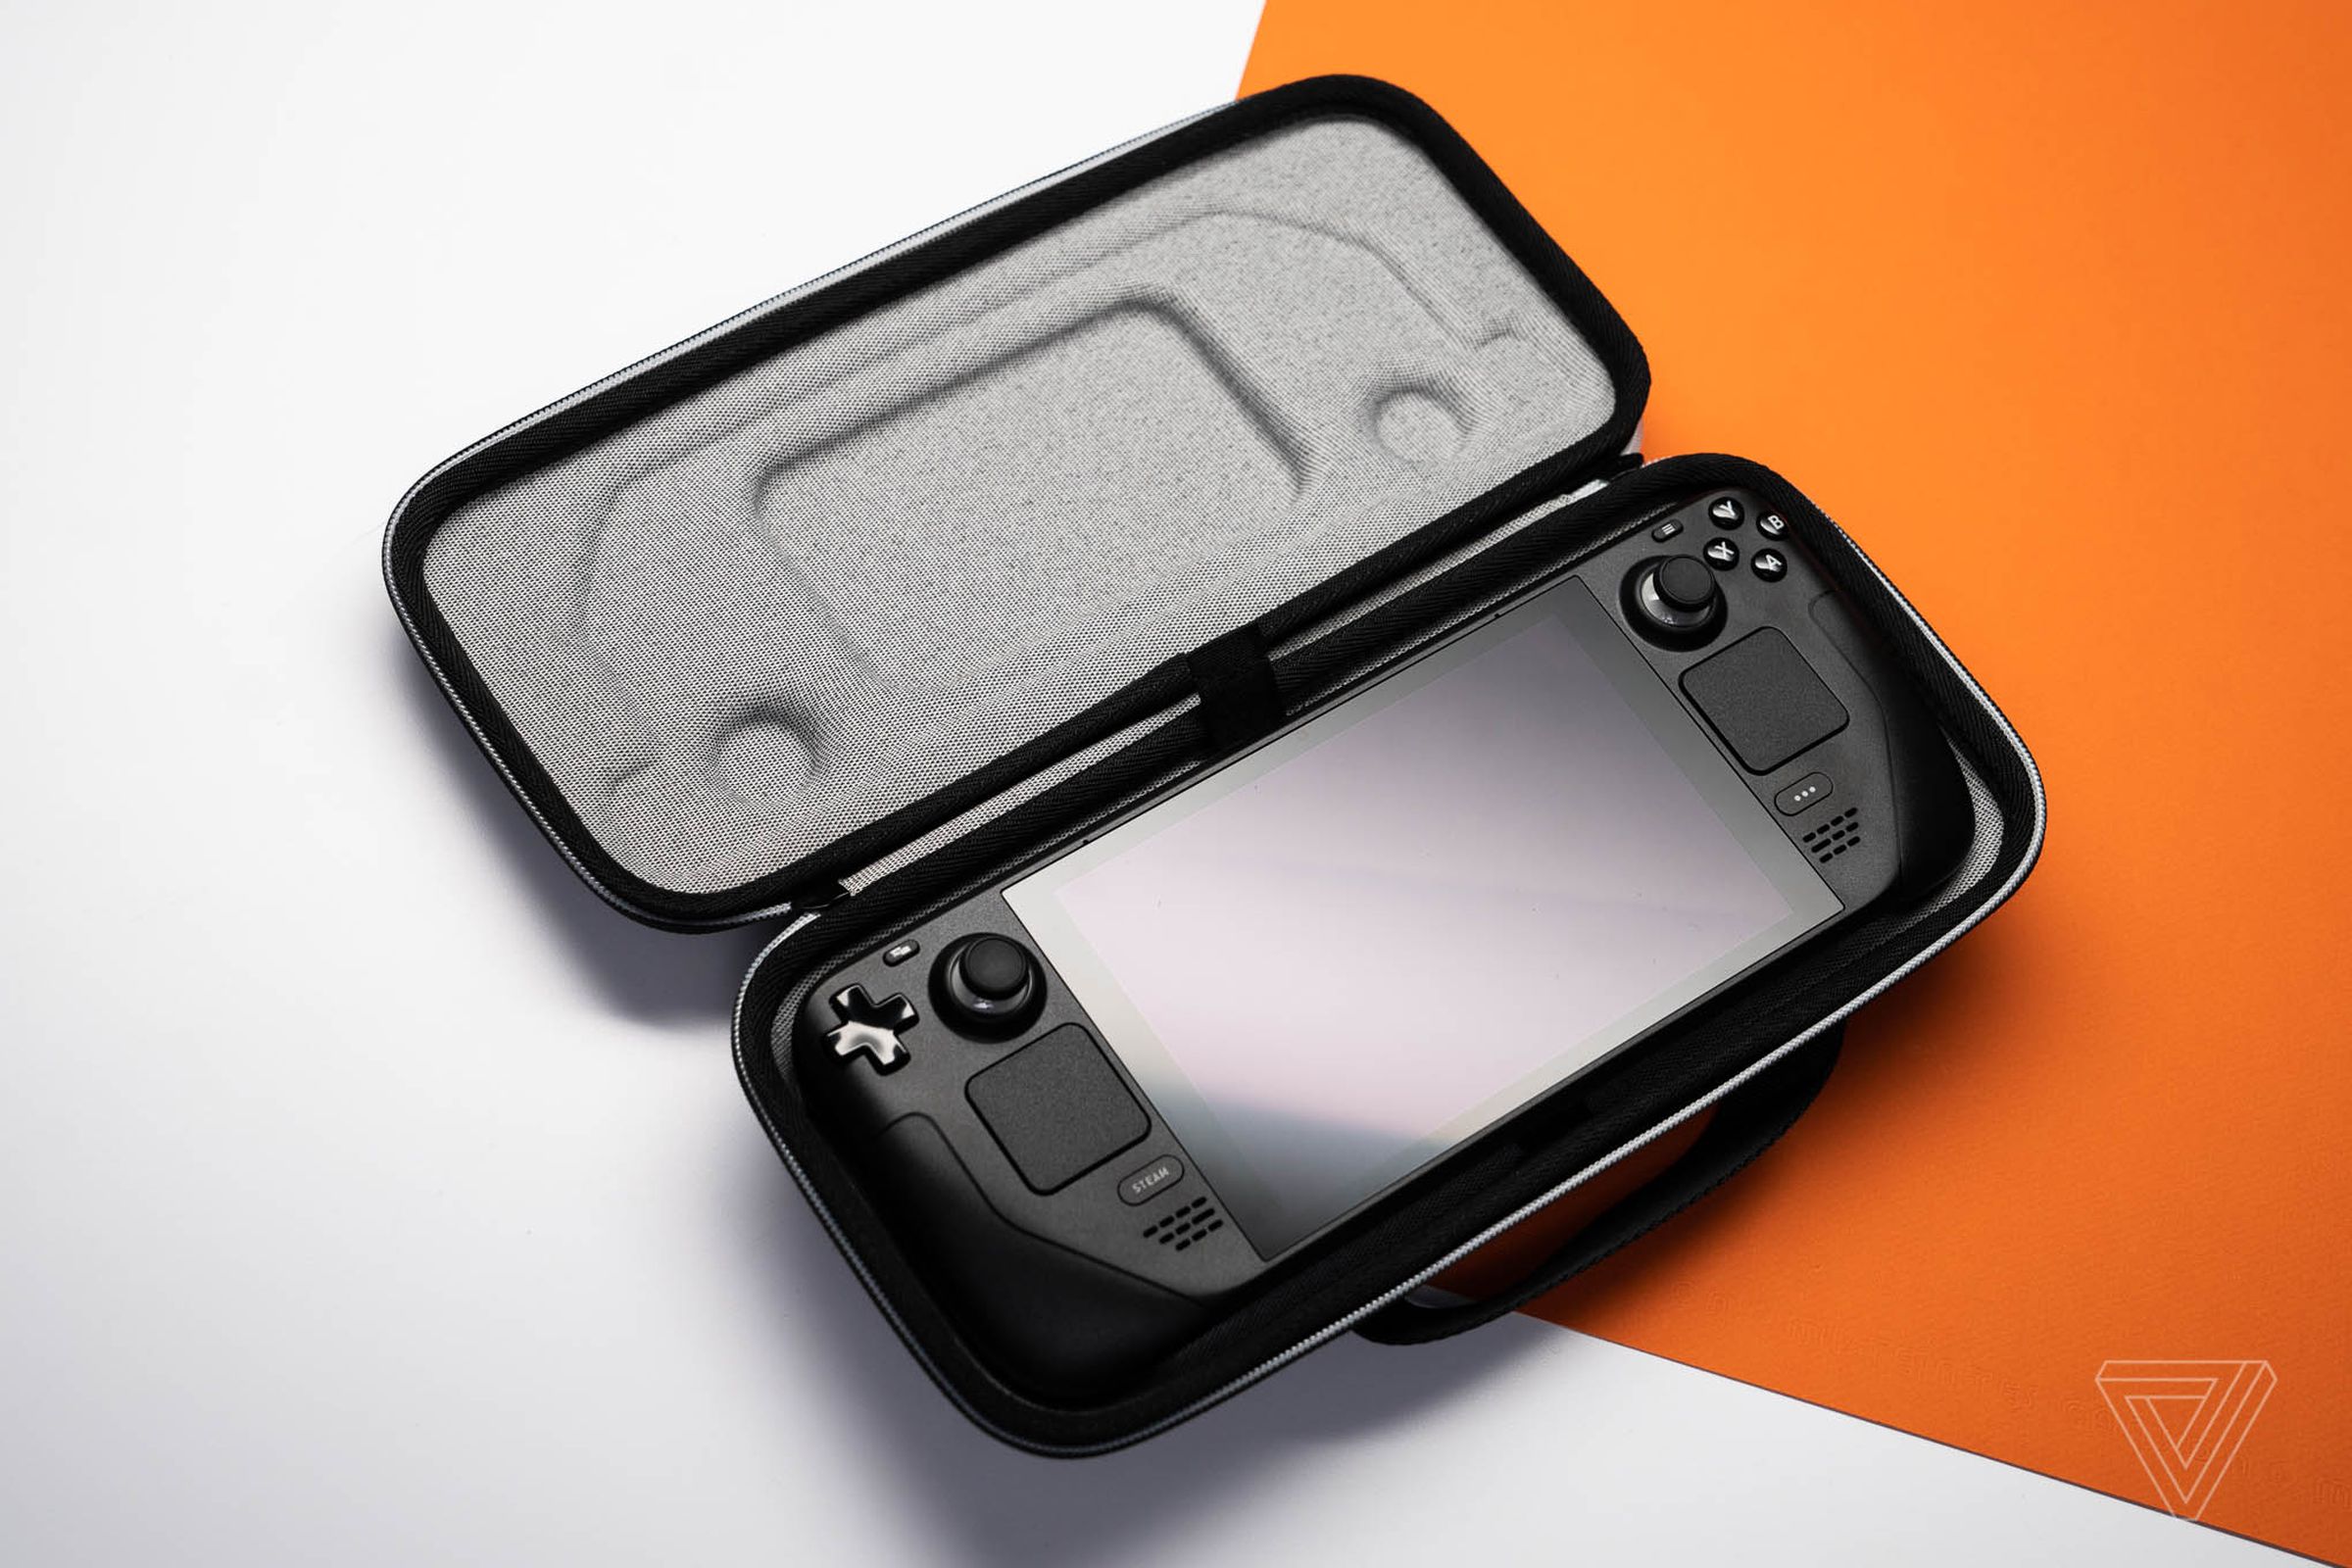 A black gaming handheld with twin sticks and touchpads sits in an open grey zippered fabric case atop an orange and white background